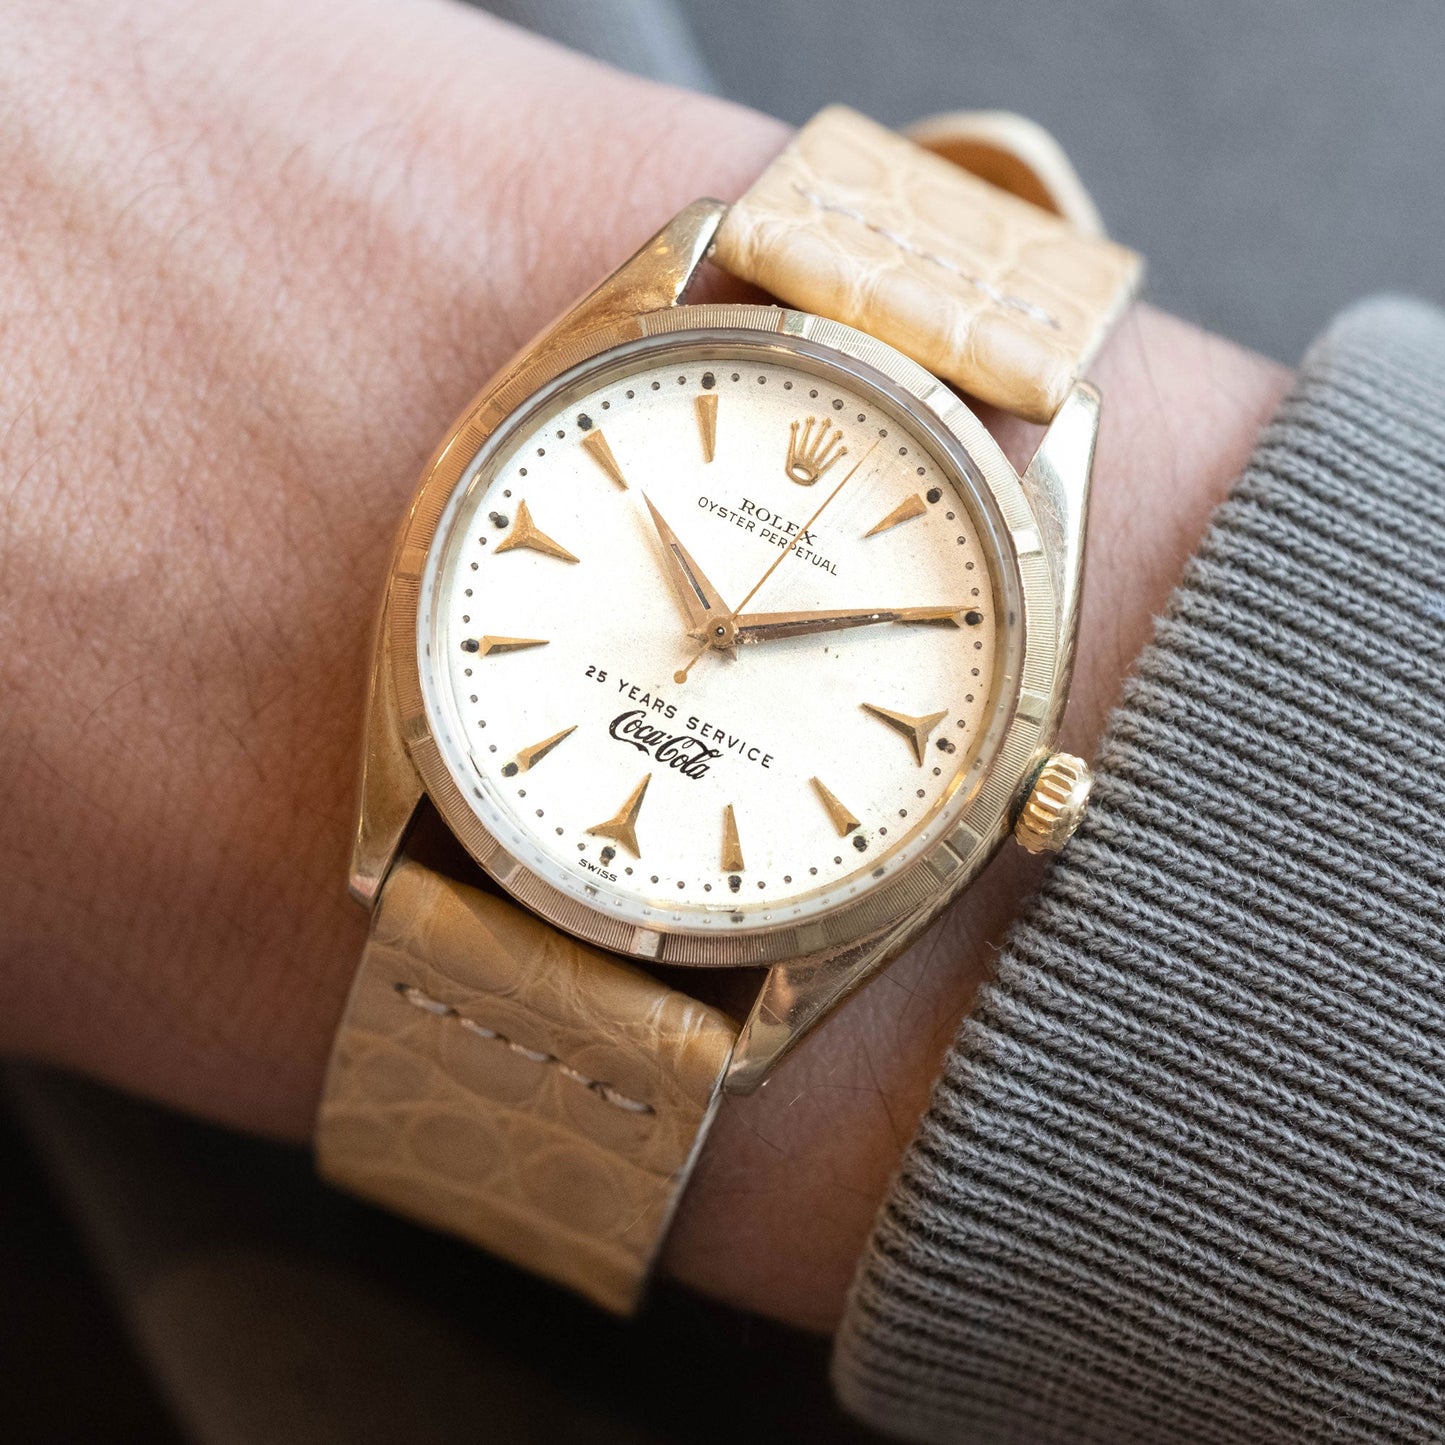 Rolex Oyster Perpetual Coca-Cola ref.6565 from 1956